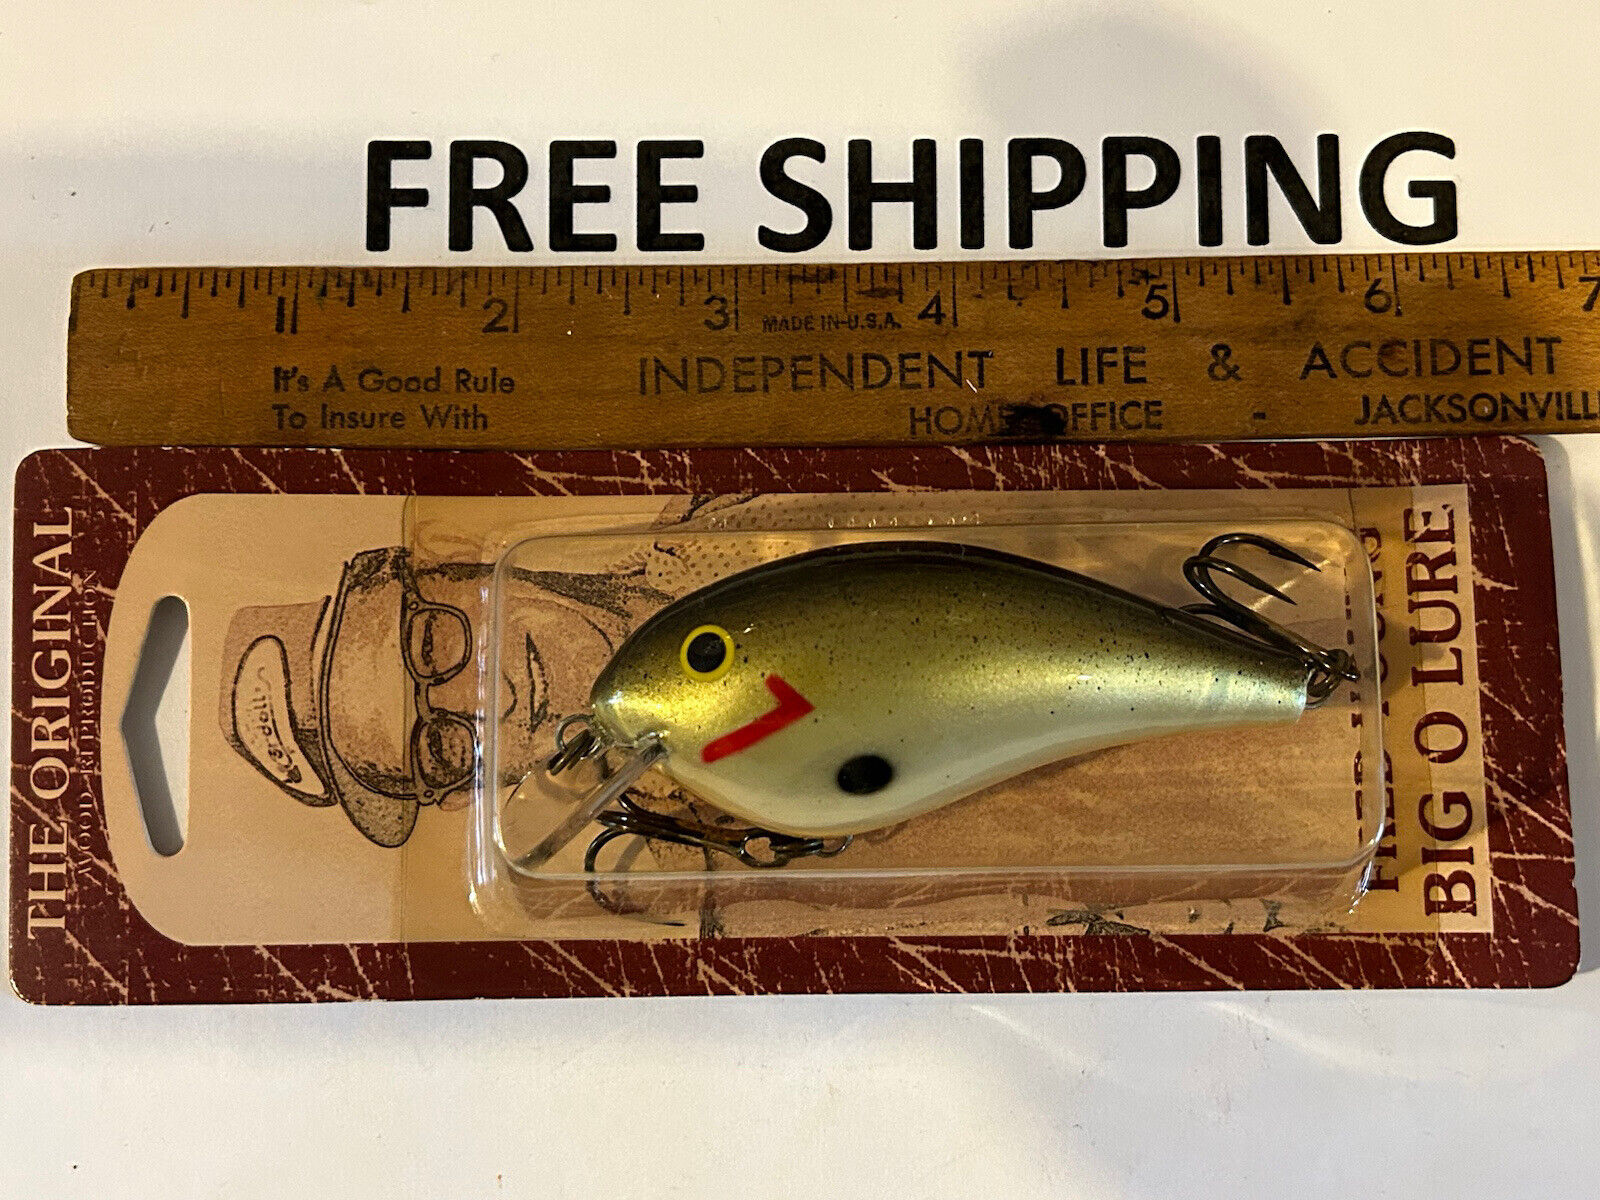 Fred Young Big O Cordell 2000's Original Wood Reproduction Lure